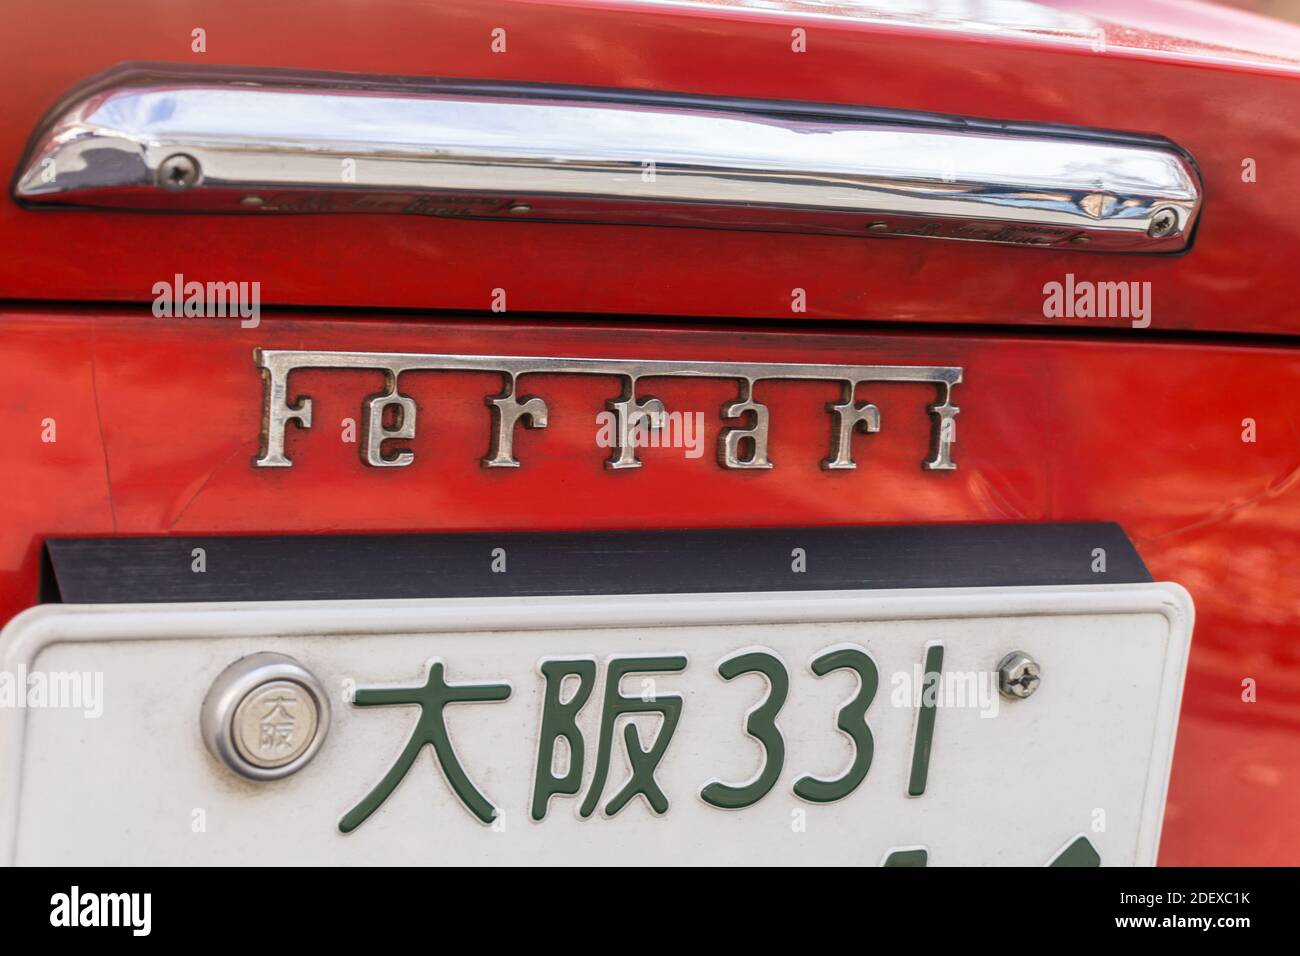 Close up detail of the Ferrari name badge and license plate on the back of a red 1970s Dino 246 GT sports car. Japanese writing reads Osaka. Stock Photo